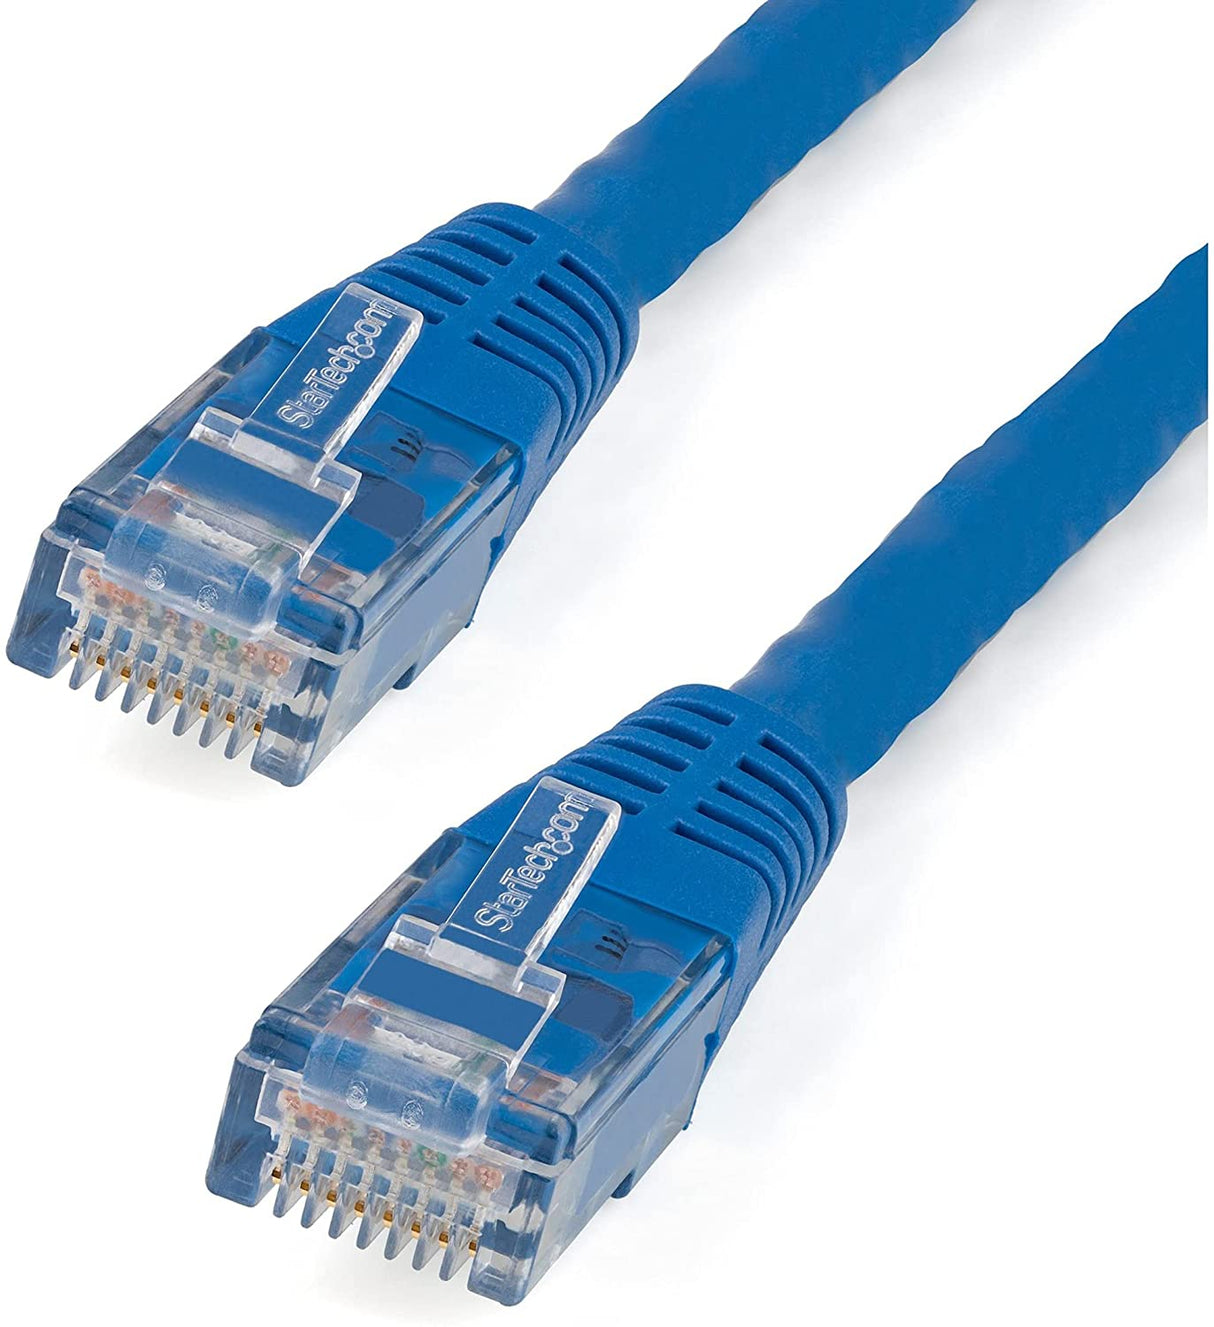 StarTech.com 35ft CAT6 Ethernet Cable - Blue CAT 6 Gigabit Ethernet Wire -650MHz 100W PoE++ RJ45 UTP Molded Category 6 Network/Patch Cord w/Strain Relief/Fluke Tested UL/TIA Certified (C6PATCH35BL) Blue 35 ft / 10.6 m 1 Pack